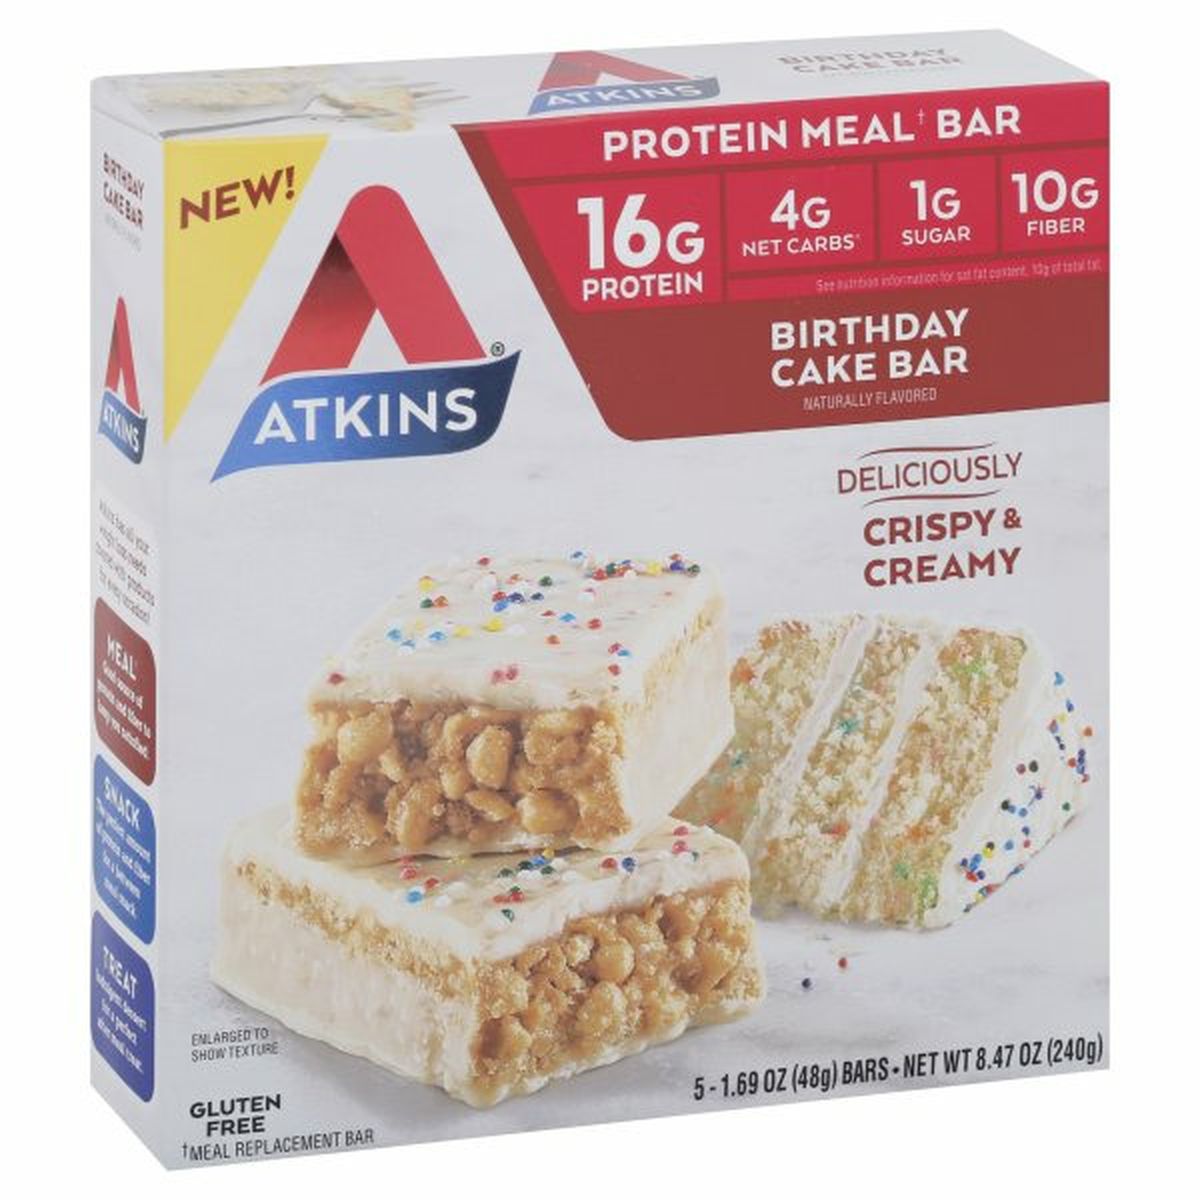 Calories in Atkins Protein Meal Bar, Birthday Cake